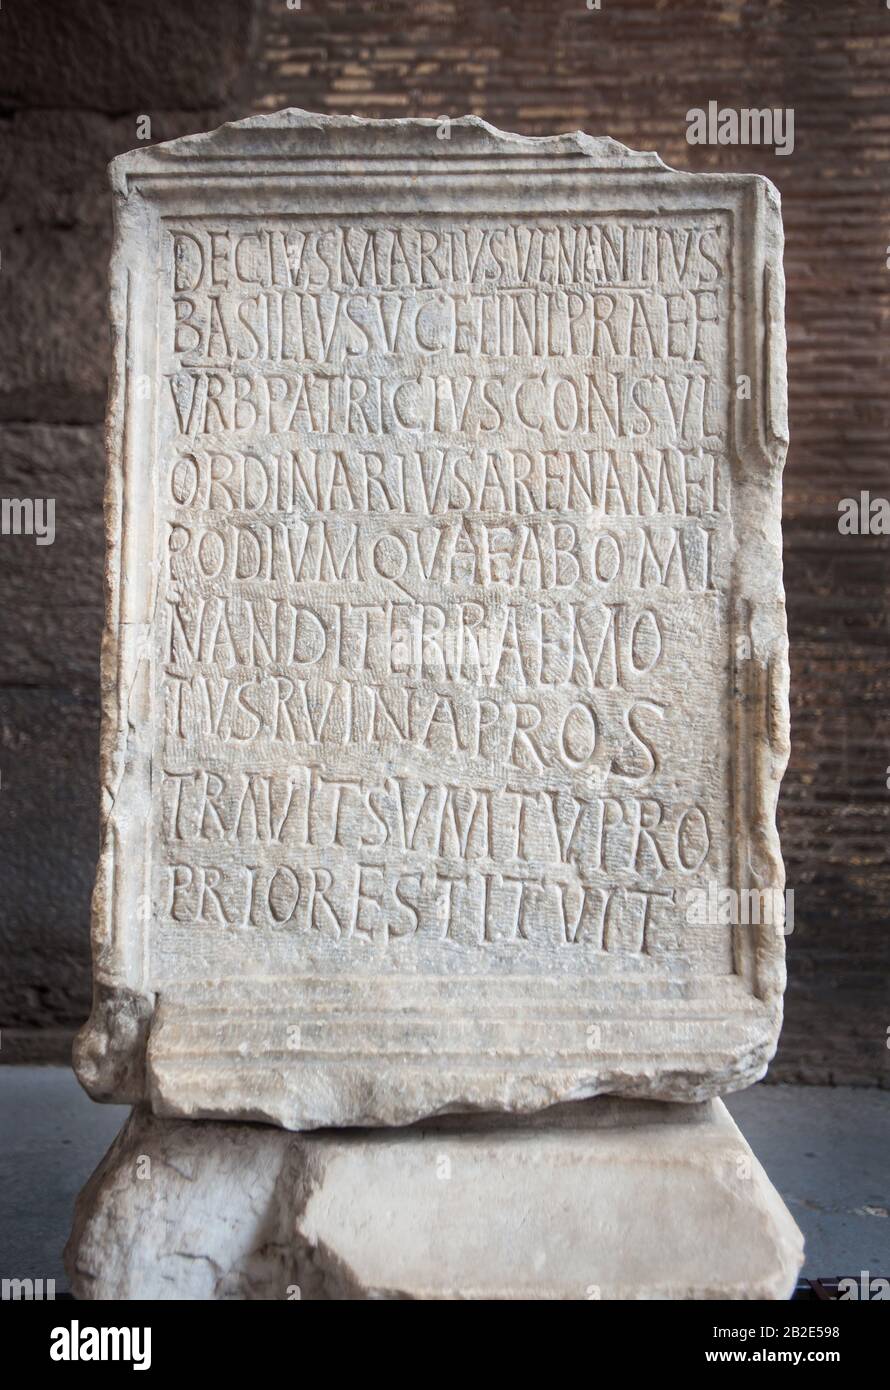 Ancient marble tablet engraved with the Venantius incription inside the Colosseum in Rome, Italy Stock Photo